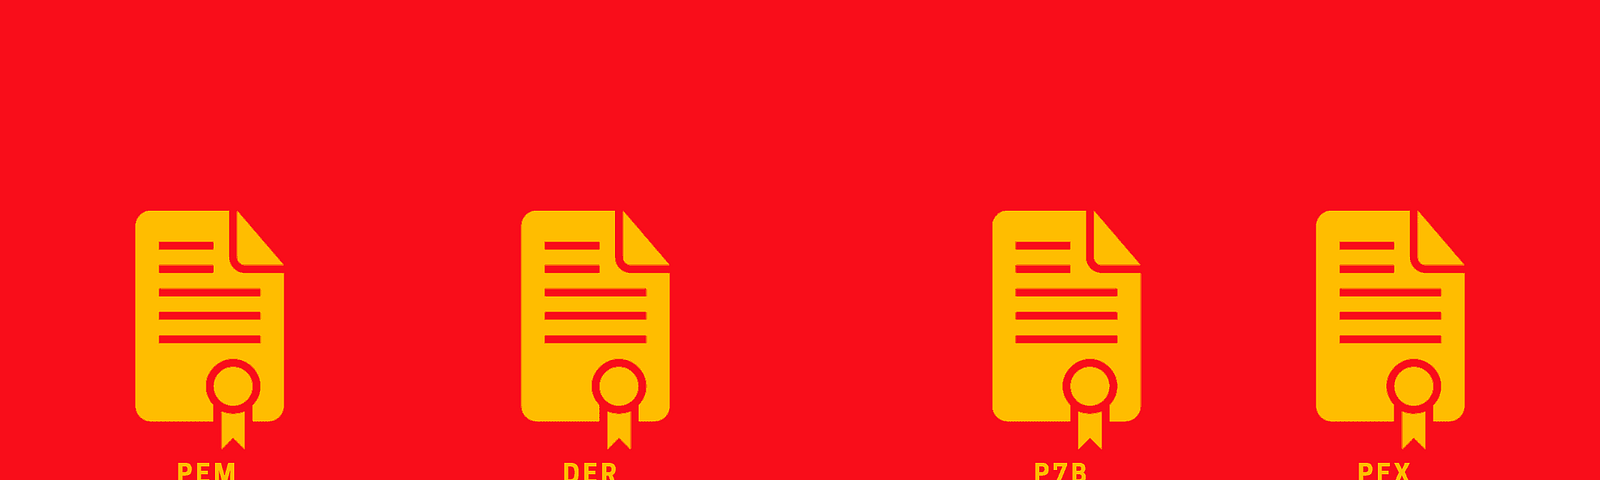 certificate formats types indicated on a red background